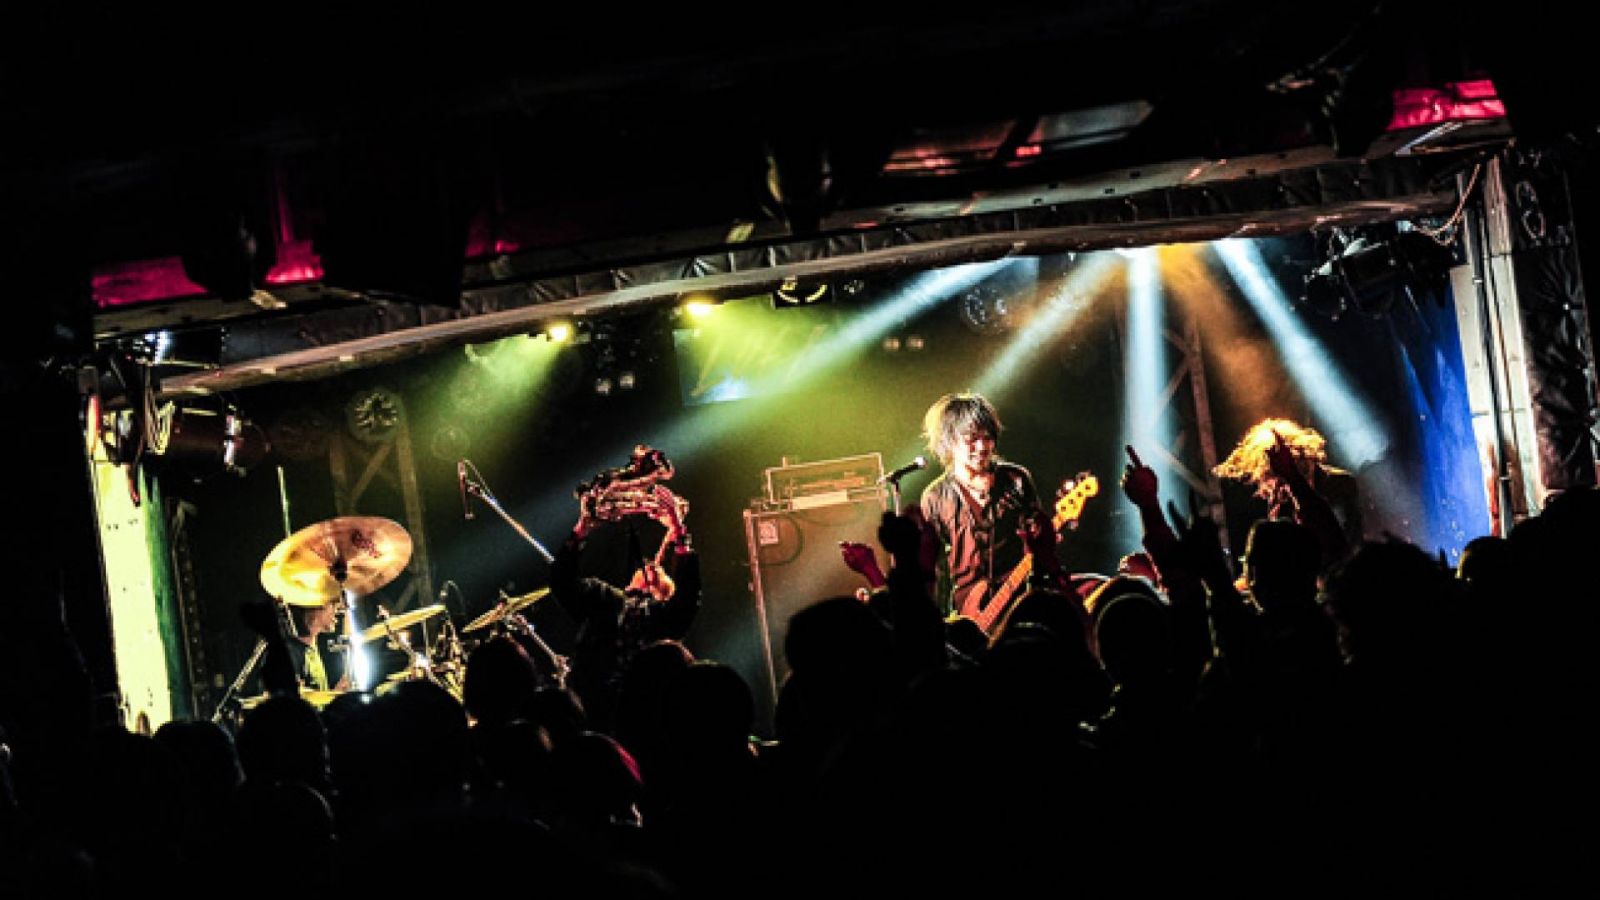 KAGERO IV Release Tour Final: THE END OF LANDSCAPE © 2015 KADOKAWA CORPORATION All rights reserved.